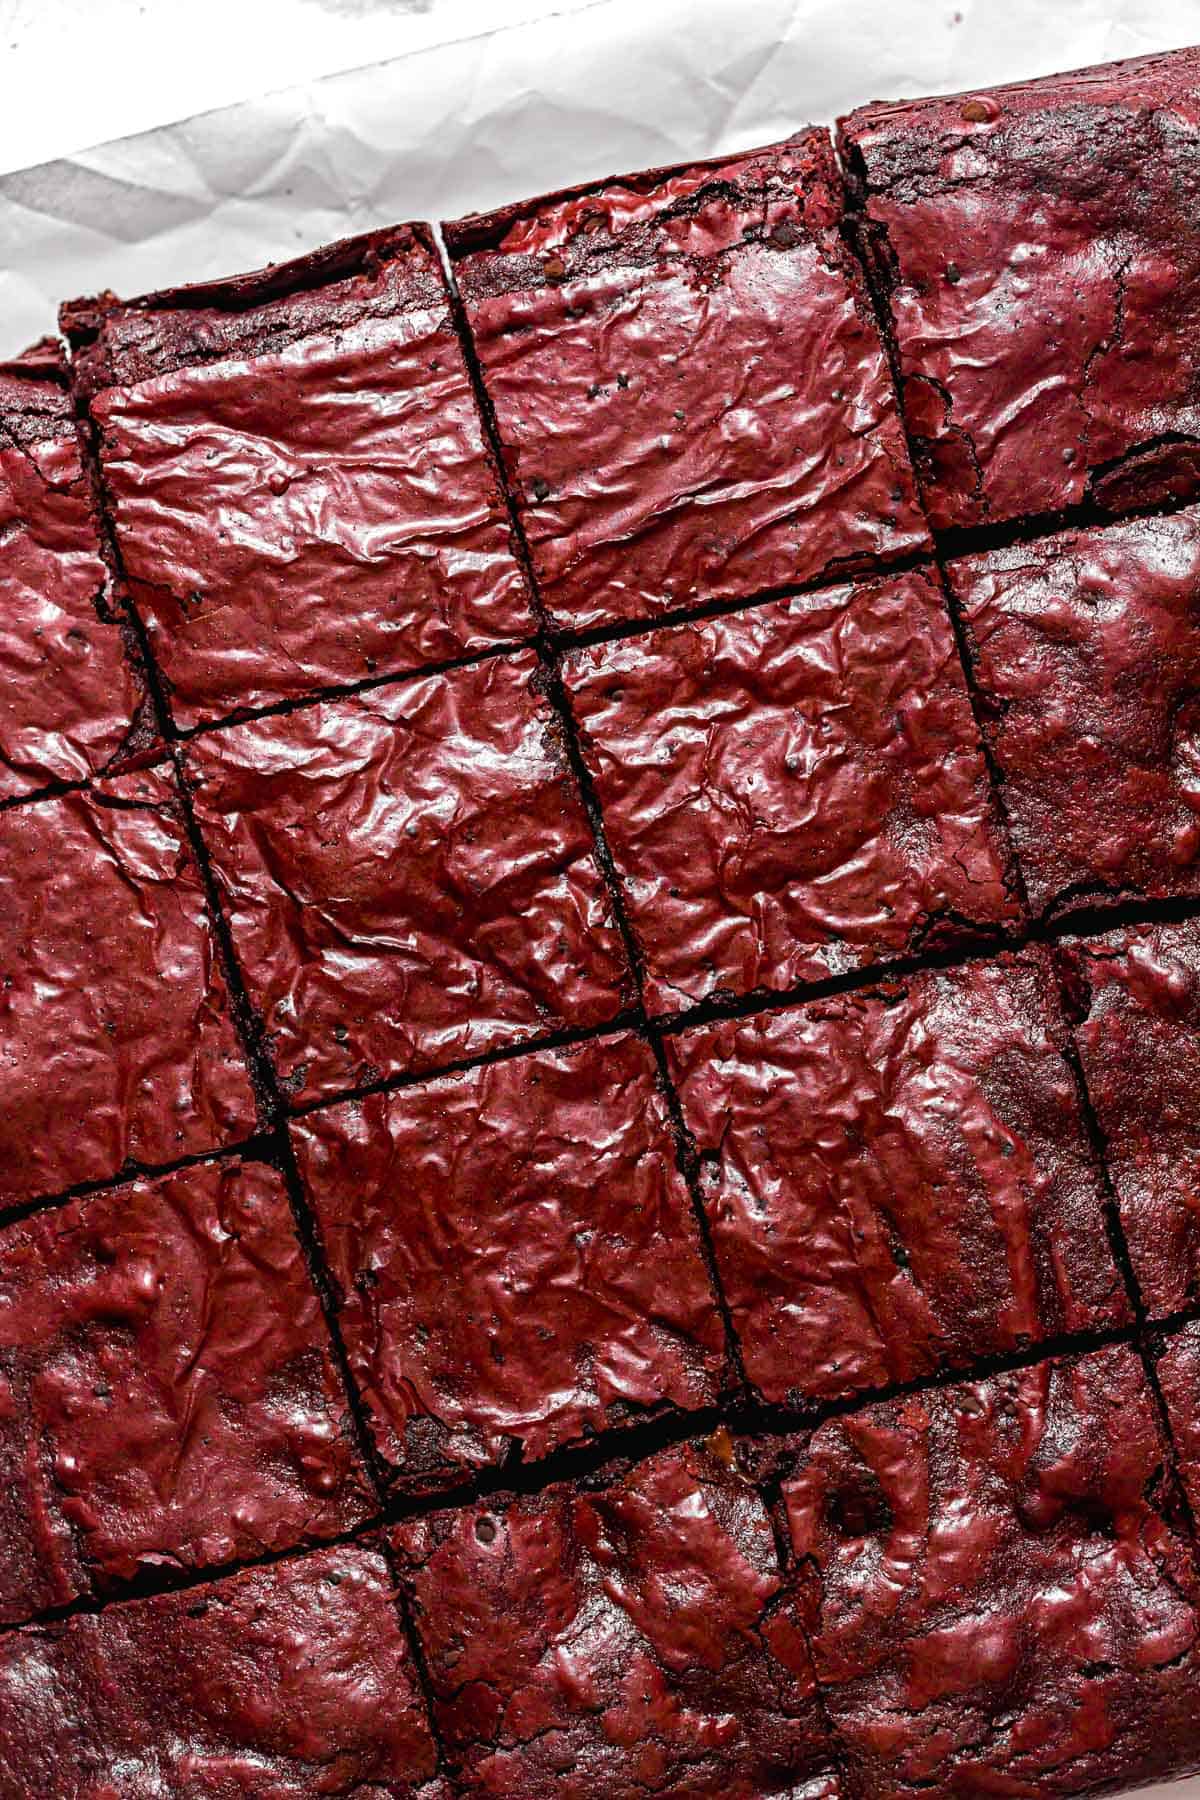 baked brownies cut into squares on parchment paper.